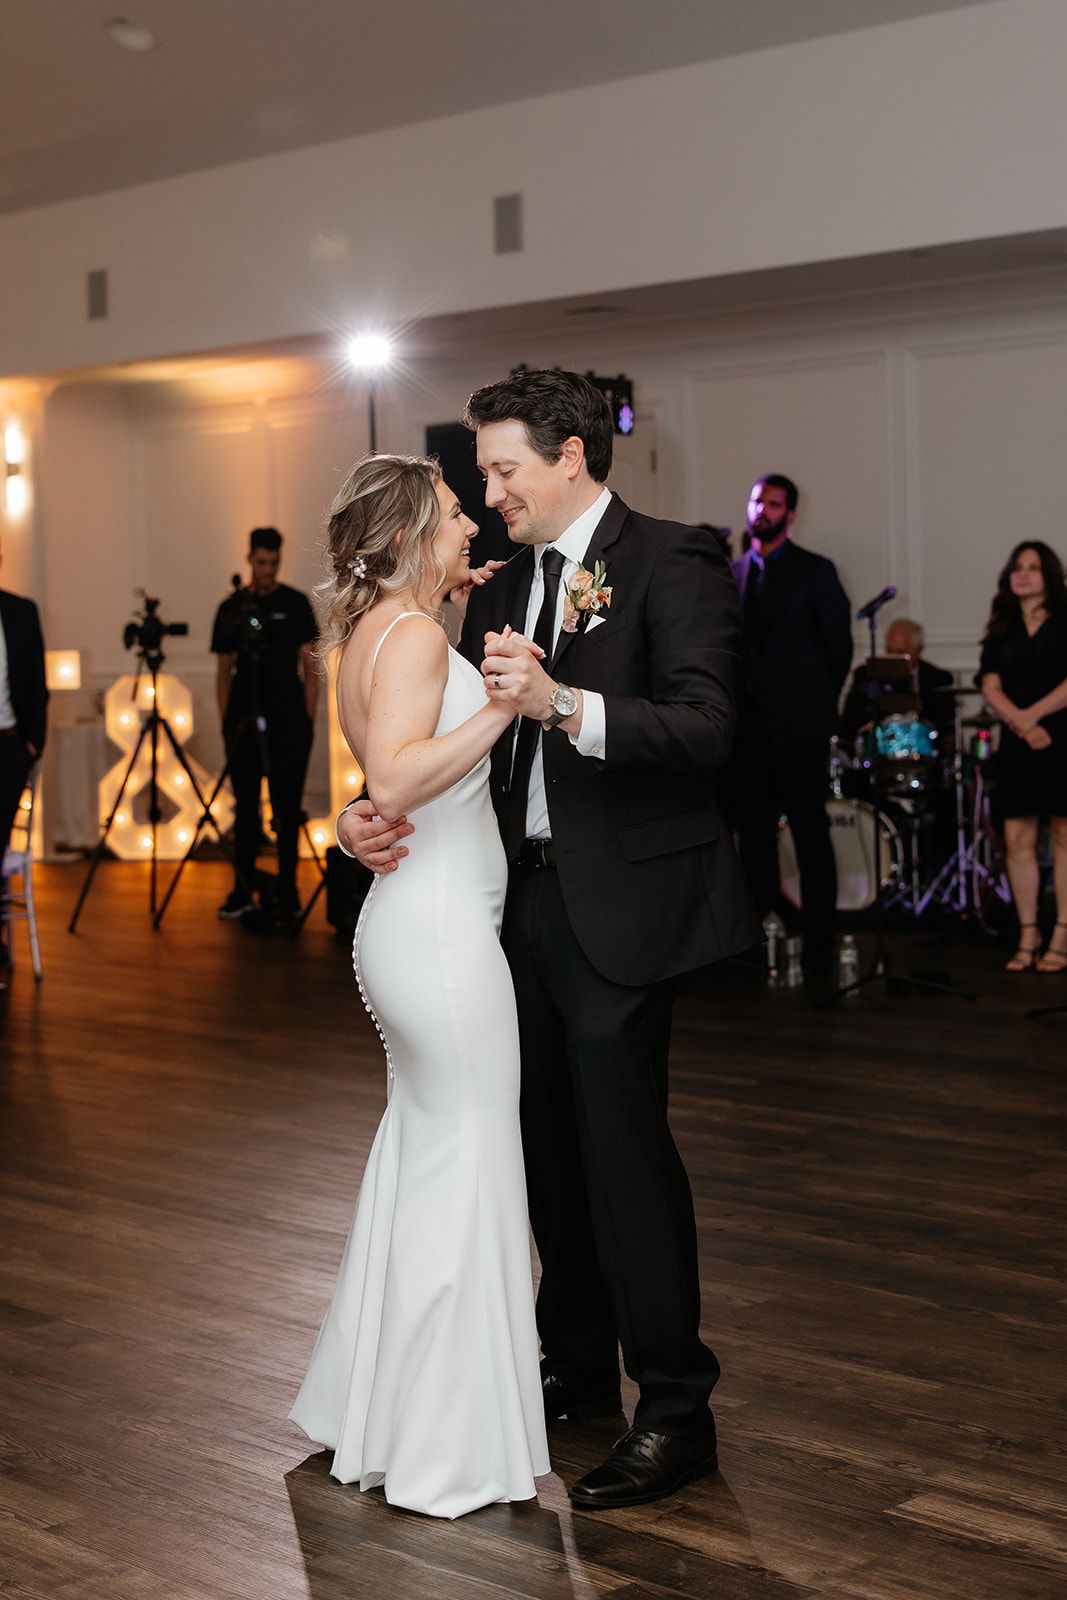 A joyful bride and groom dancing together at their wedding reception, celebrating their special day with love and happiness.